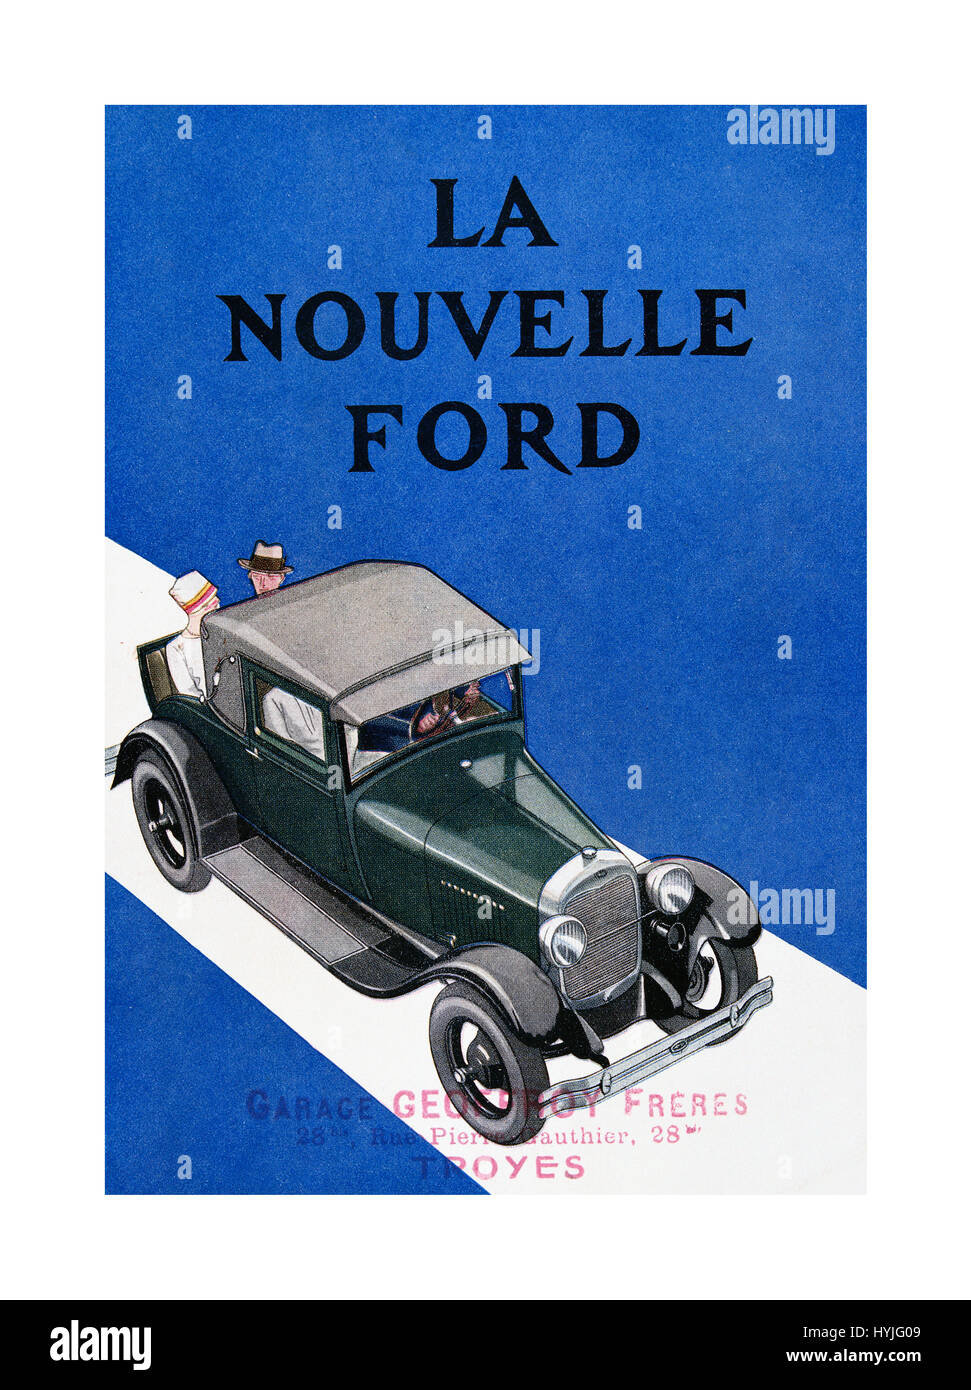 1928 VINTAGE FORD AUTOMOBILE BROCHURE La Nouvelle Ford- Ford Sport Coupe Landau with French overstamp from automobile dealer garage in Troyes France Stock Photo